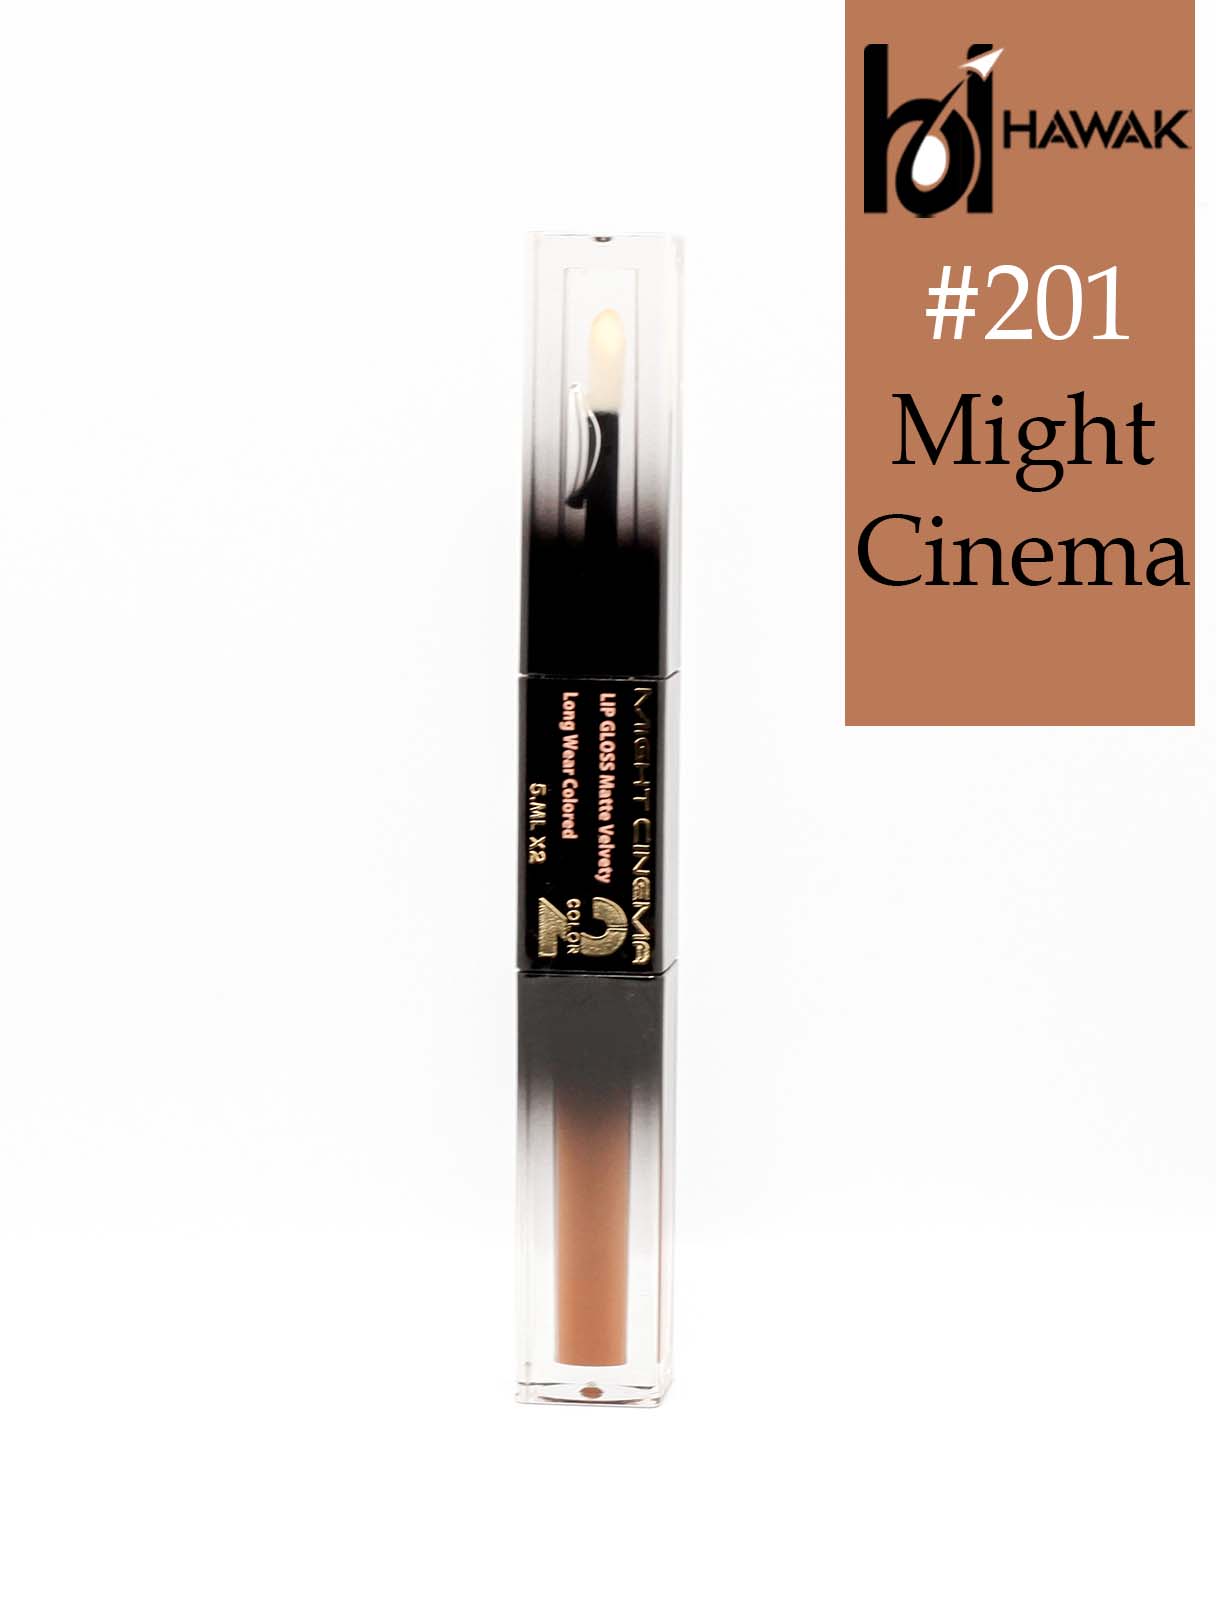 Liquid lipstick with gloss from Might Cinema